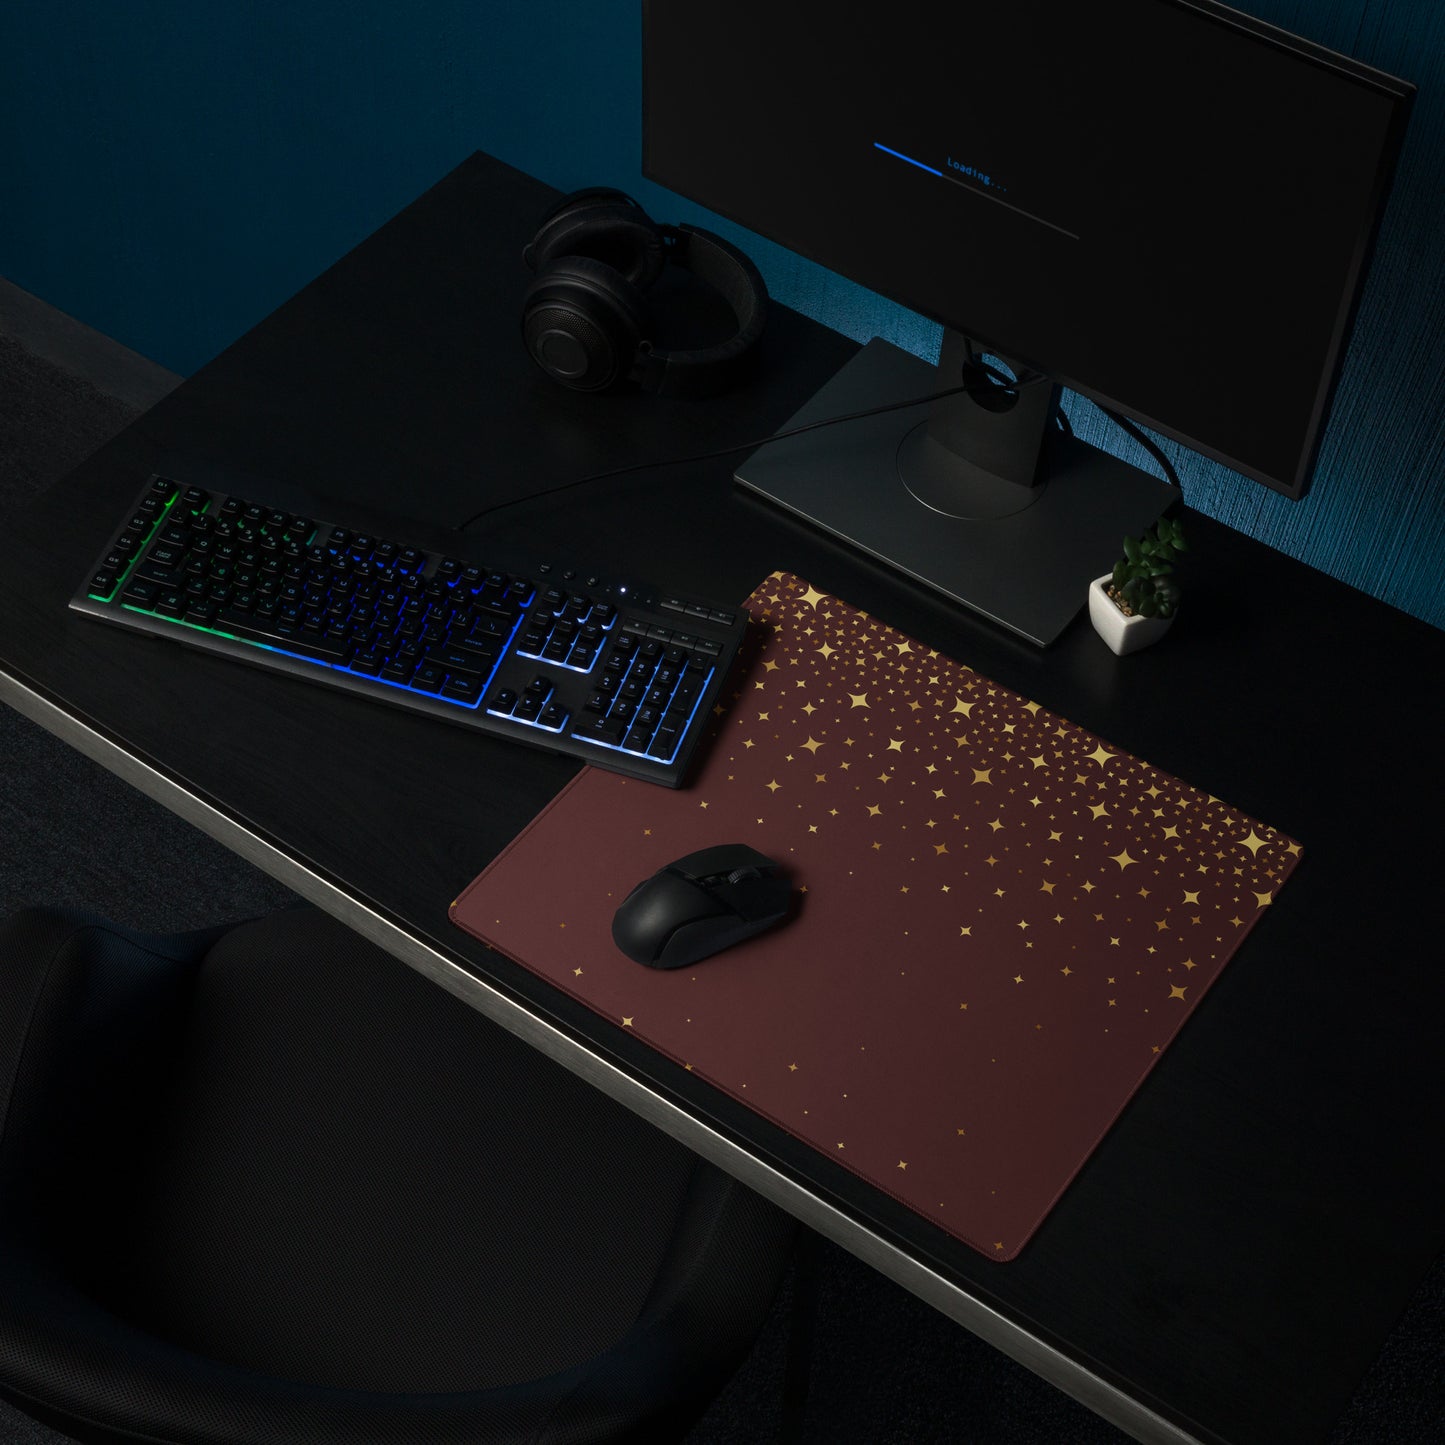 Burgundy Gold Star Gaming Mouse Pad